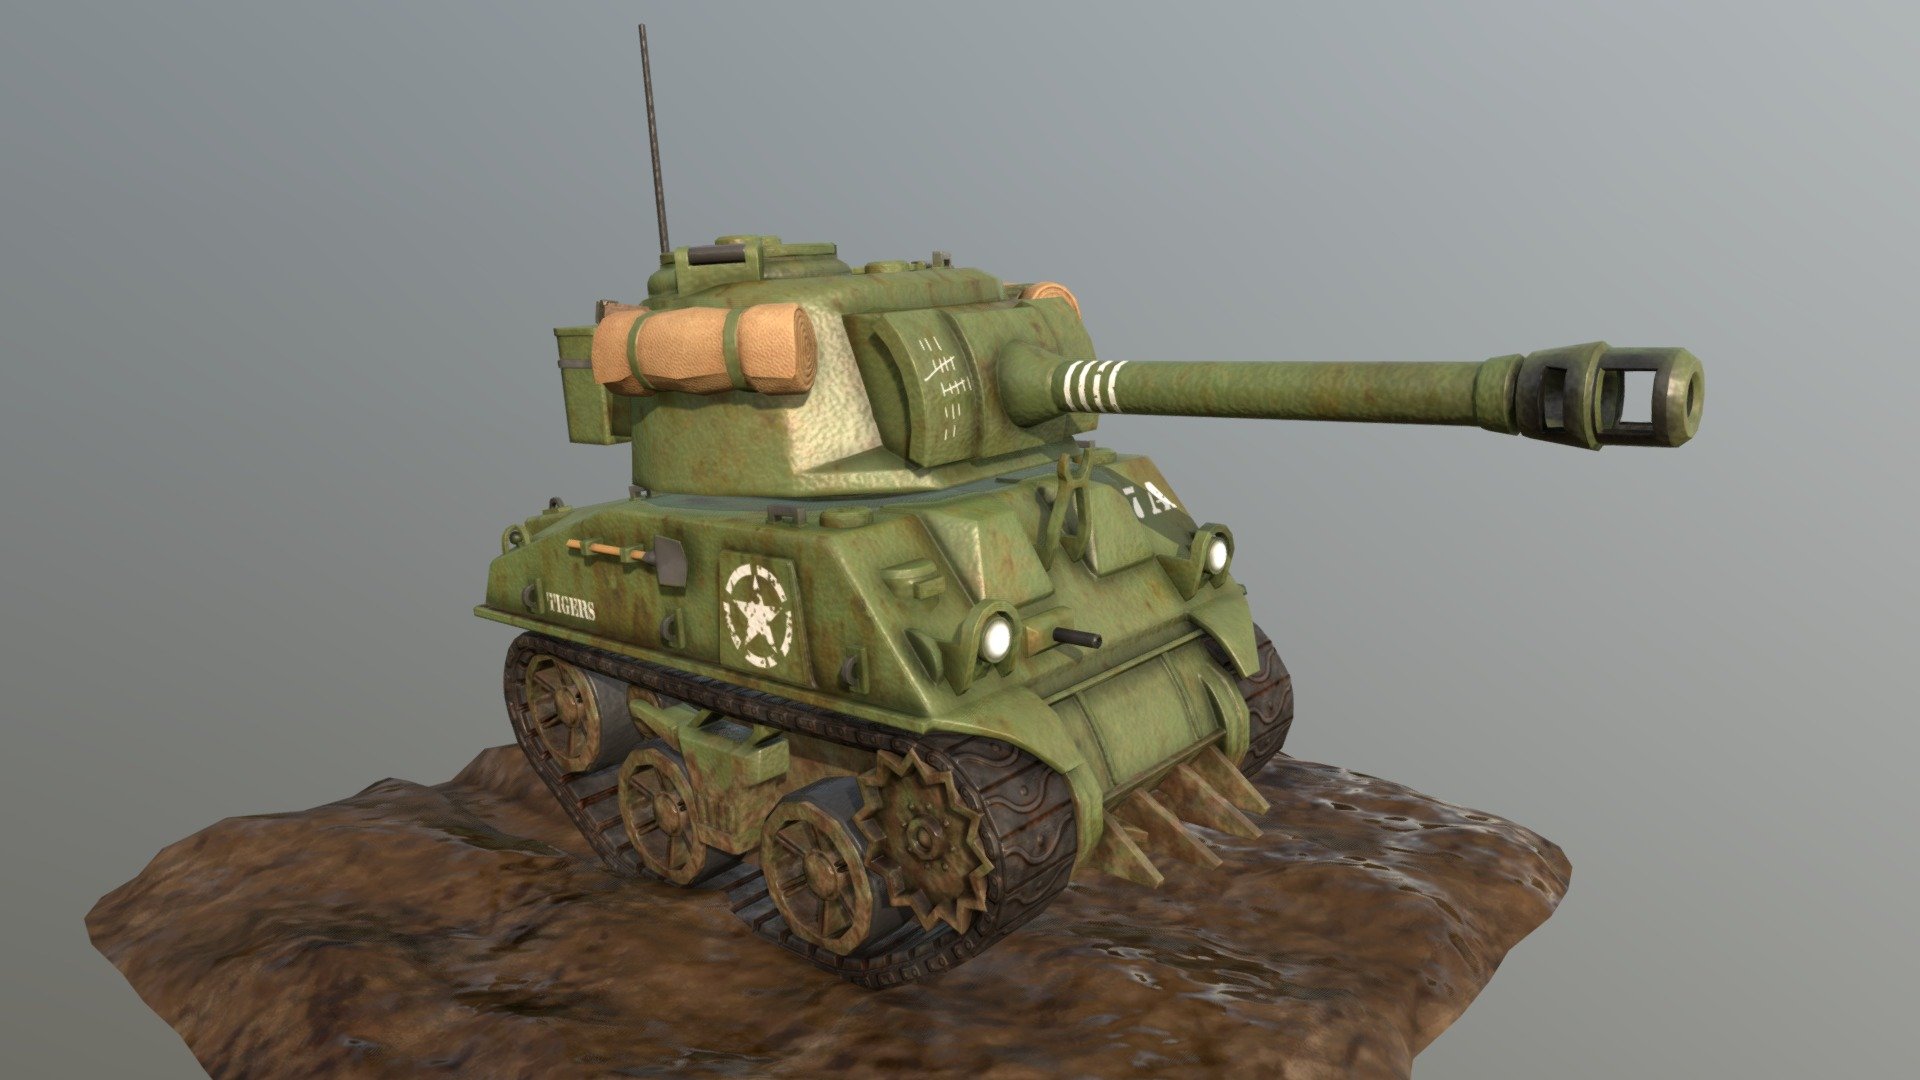 A WW2 chubby tank! Based on a Sherman Tank. Included:





GAME READY MESH! Clean, Light Topology! (Polys just Tank = 7,265)




In a hierachy ready to animate! Also comes with a seperate animation (FBX format).




Tank Tracks and Mud are textured with vertical tiling to allow UV animation!




Neatly Unwrapped with clear UVW islands!




FBX and OBJ formats.




Includes all textures in PNG format. Tank and Mud. (Diffuse, Normal, Self-Illumination, Roughness, Metal.)




ALSO INCLUDES Diffuse texture WITHOUT markings, making it easy for you to add you own! Also includes the UVW layout as PNG to make adding your own markings even easier!



**BONUS: Includes the Diffuse texture for the &lsquo;Chubby Unicorn Tank'! You can see here:
https://skfb.ly/6Gvzw

Please send me suggestions or requests for other models 3d model